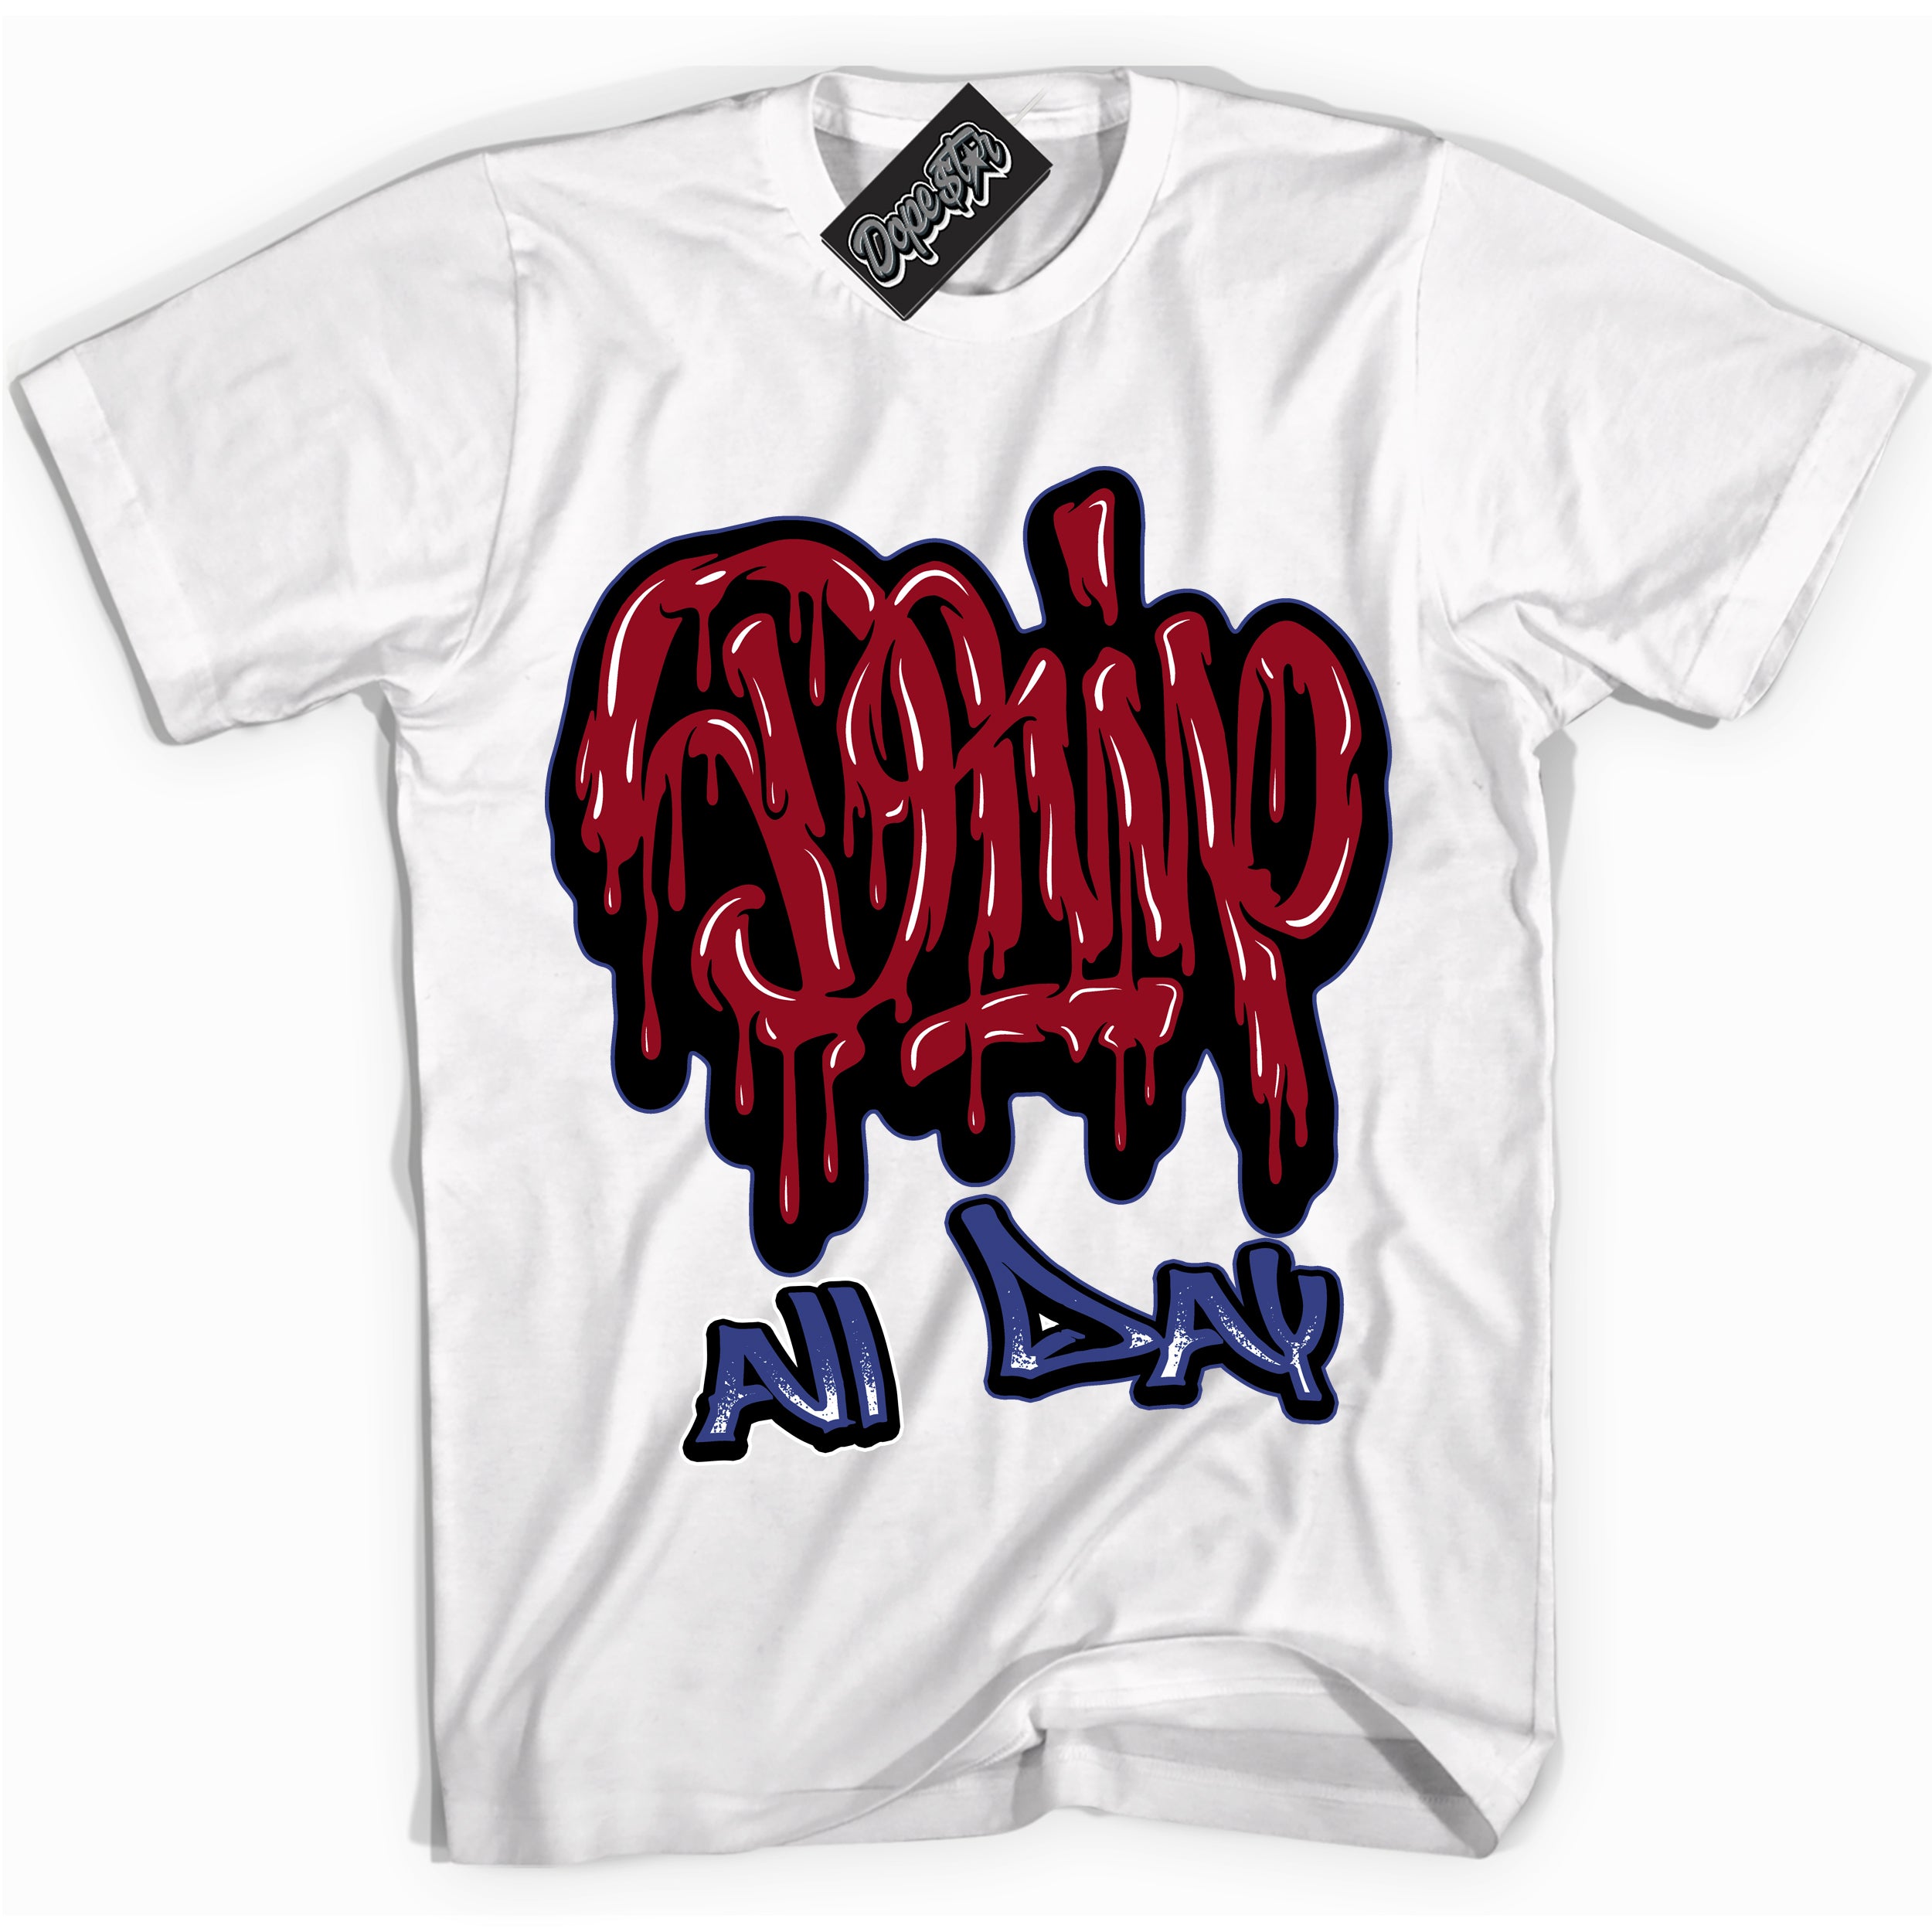 Cool White Shirt with “ Drip All Day ” design that perfectly matches Playoffs 8s Sneakers.